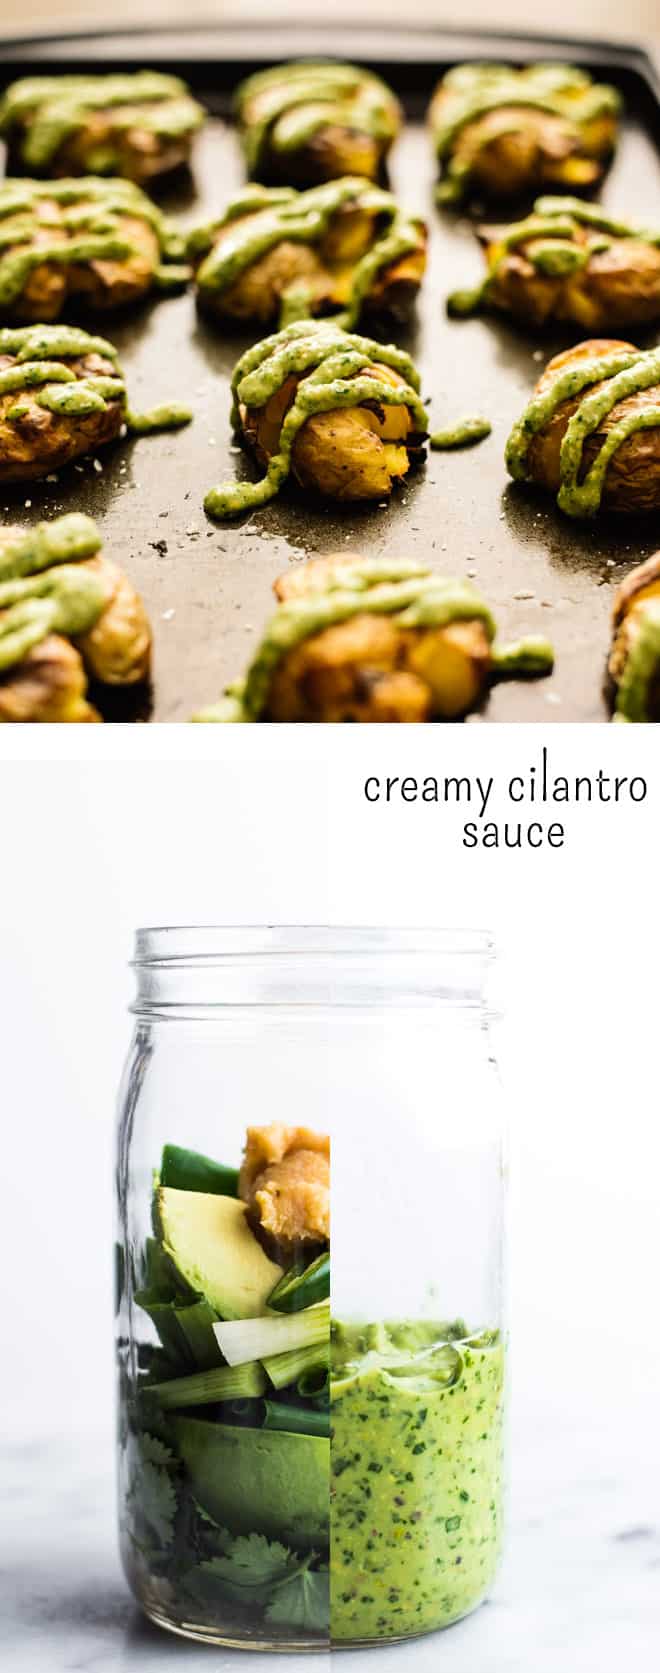 Versatile Creamy Cilantro Sauce - an easy, tasty sauce that only takes 5 minutes to make, and it goes well with everything! by Lisa Lin of webserie.futebolmilionario.com